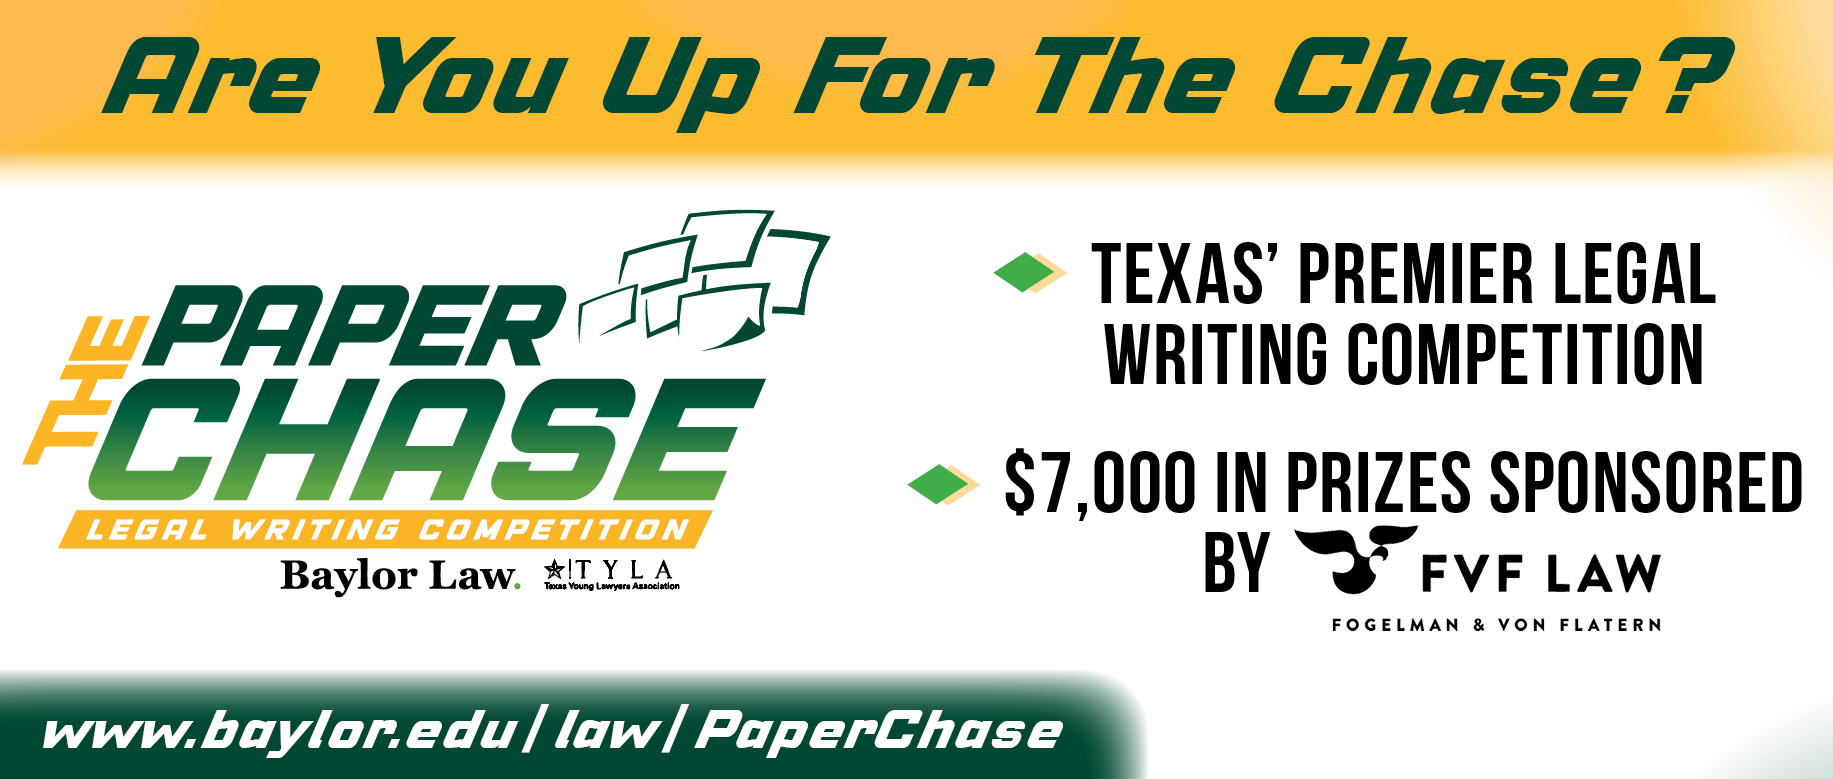 Banner for The Paper Chase